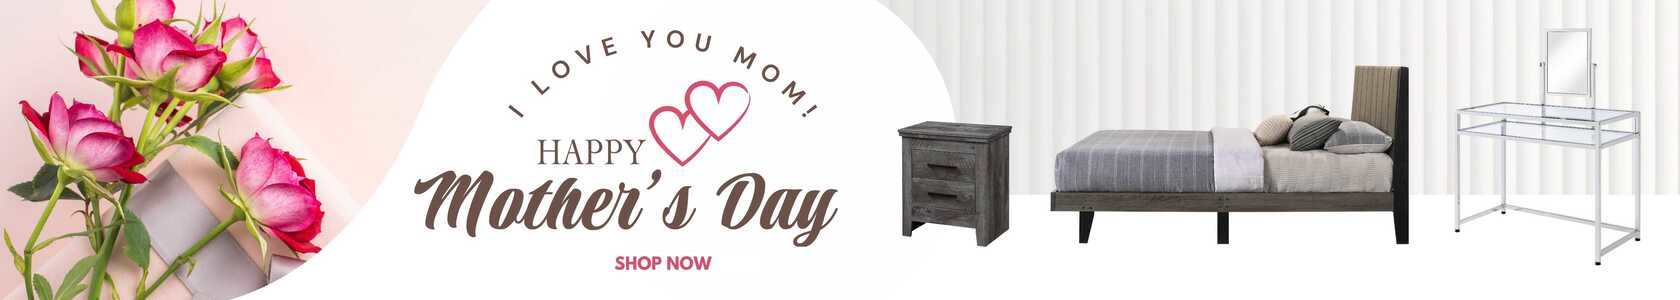 Mother’s day sale by ACME banner